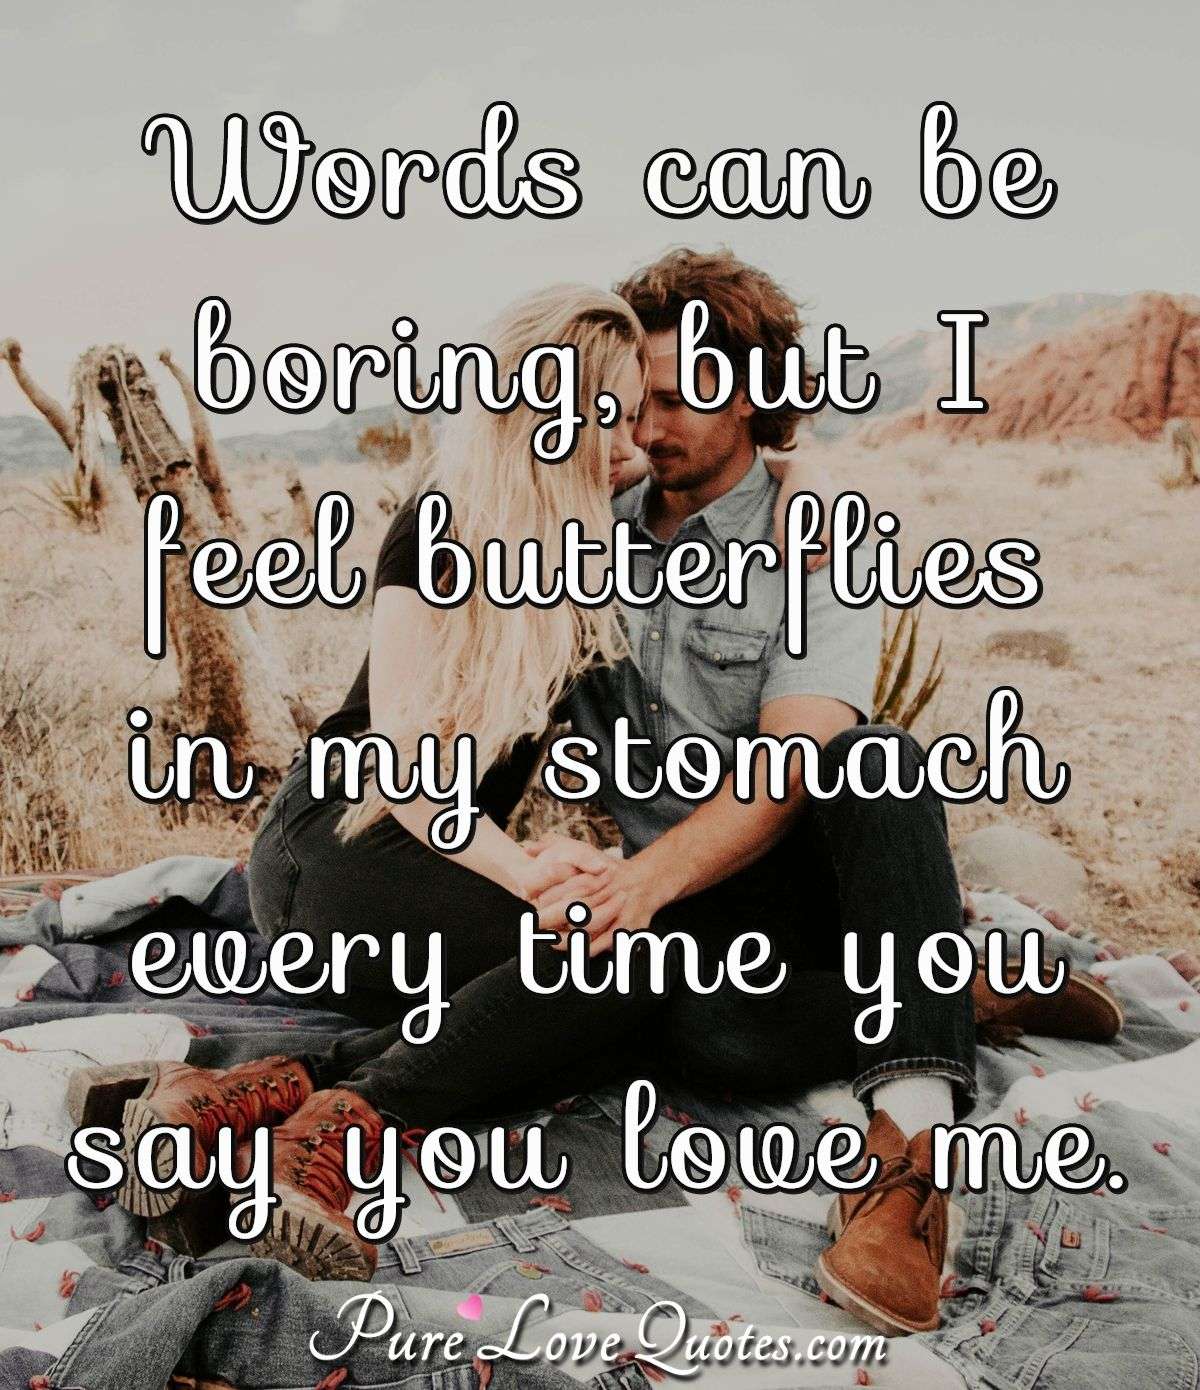 Words can be boring, but I feel butterflies in my stomach every time you say you love me. - PureLoveQuotes.com